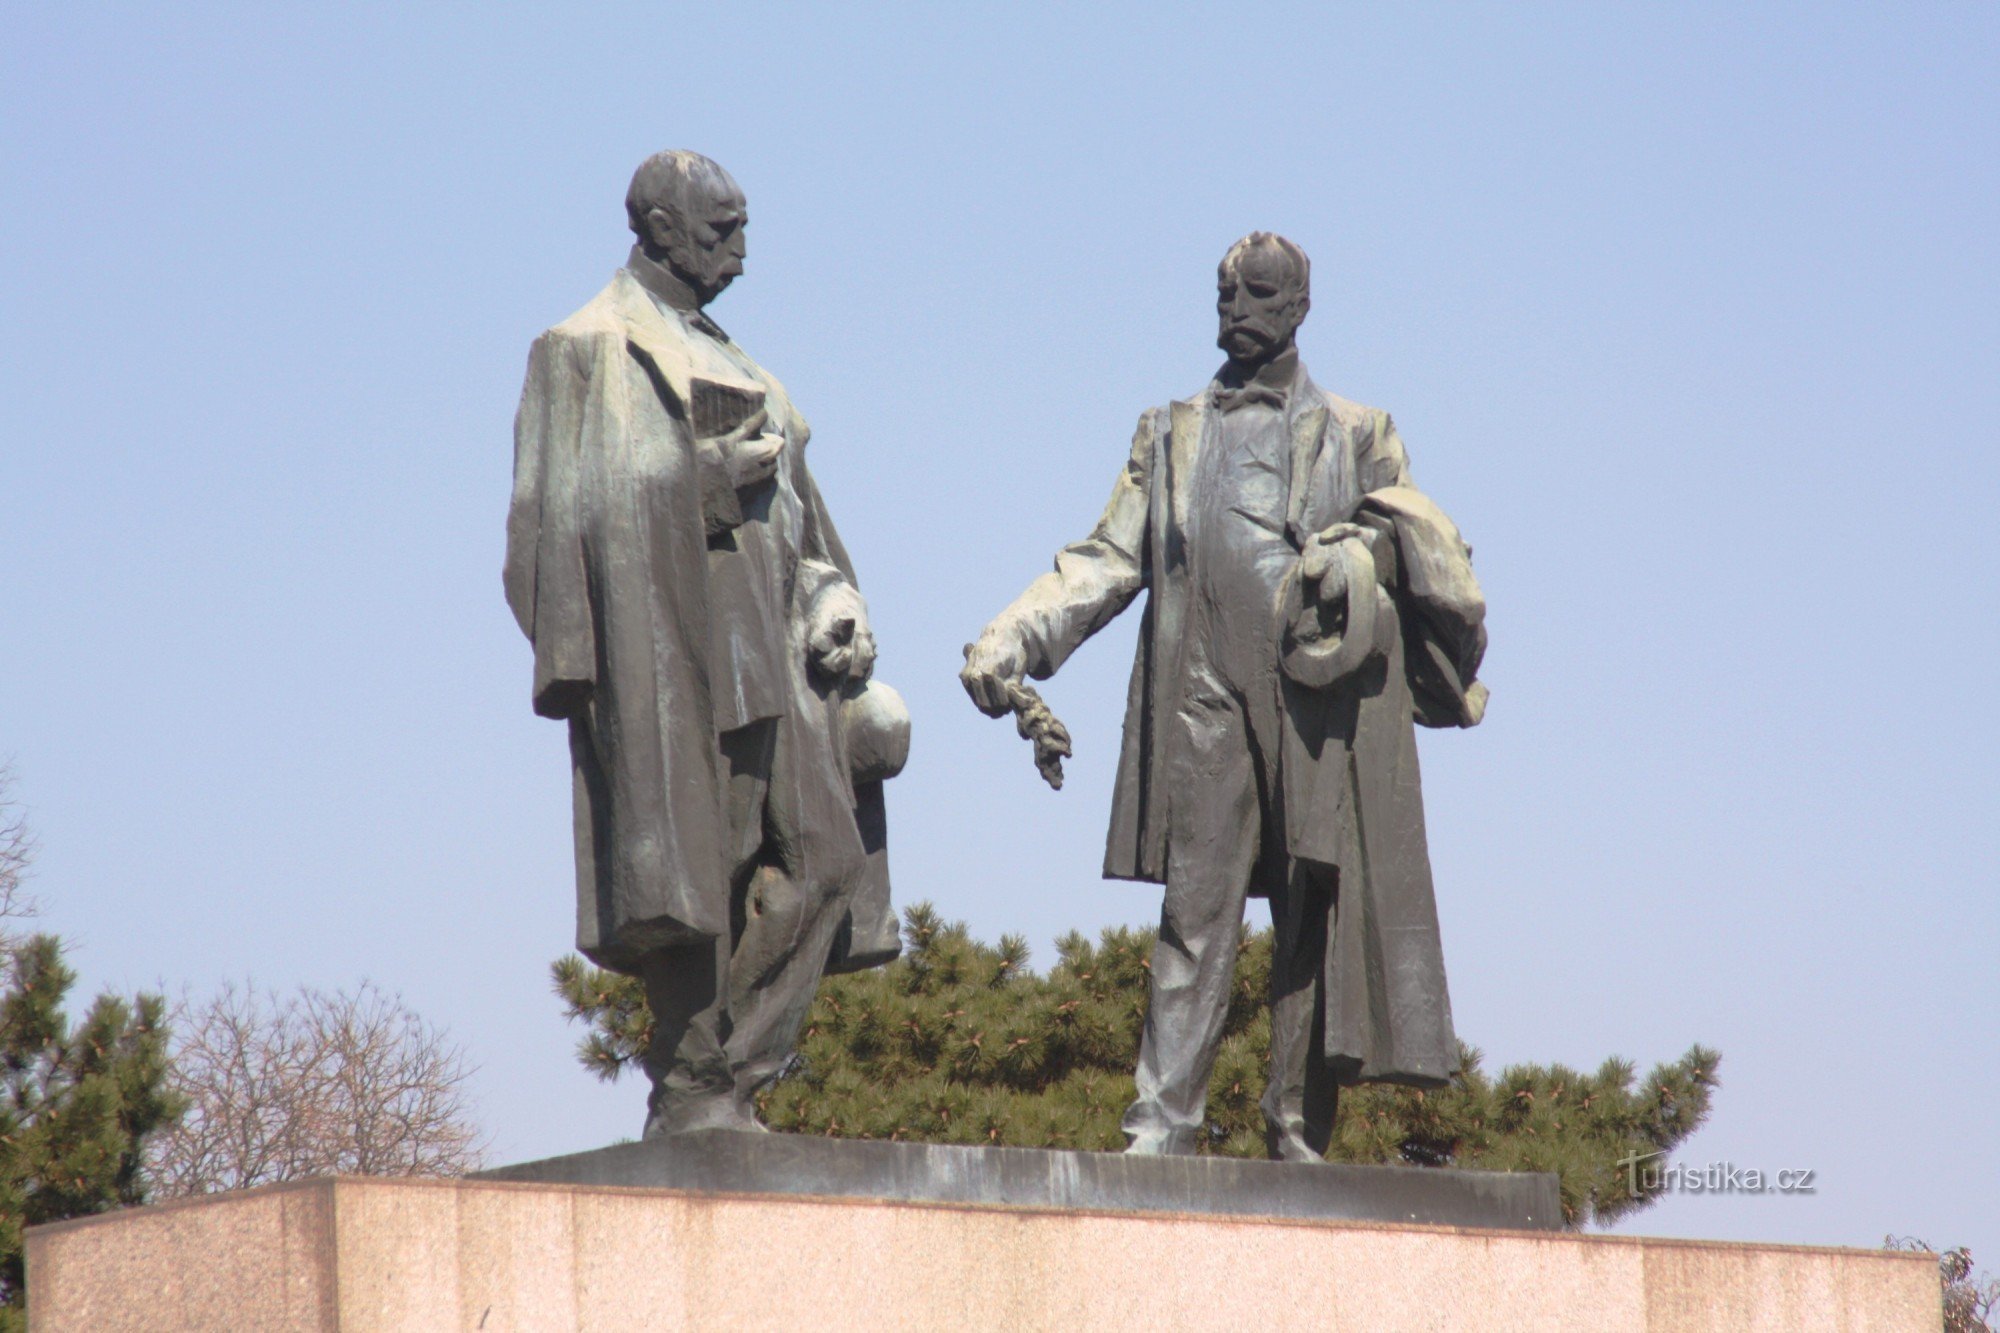 Statues of the Mrštík brothers